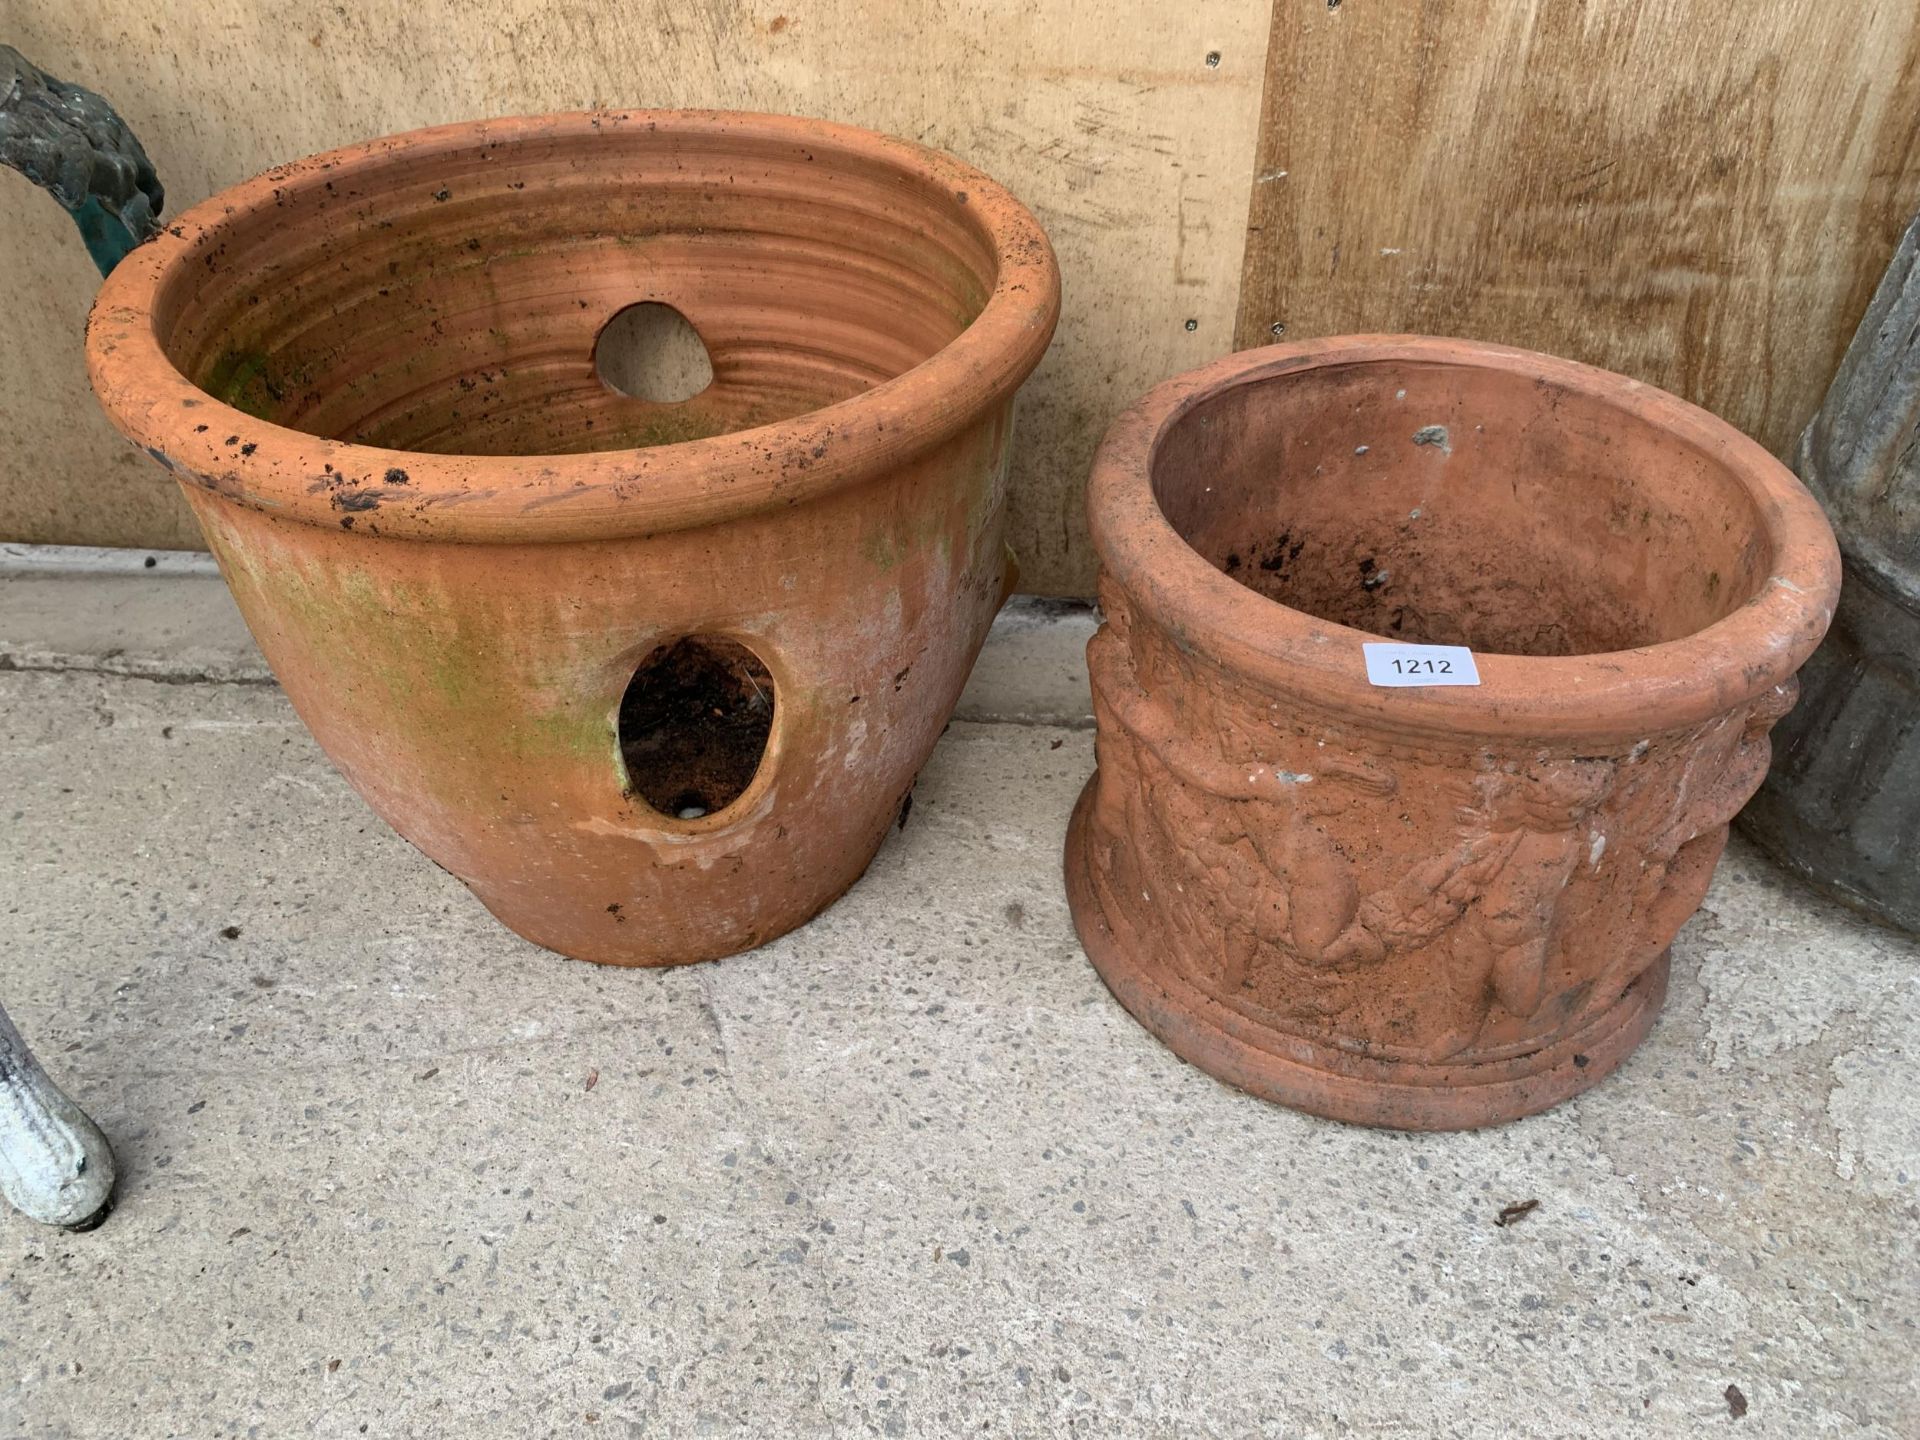 A VINTAGE TERRACOTTA PLANTER AND A FURTHER TERRACOTTA STRAWBERRY PLANTER